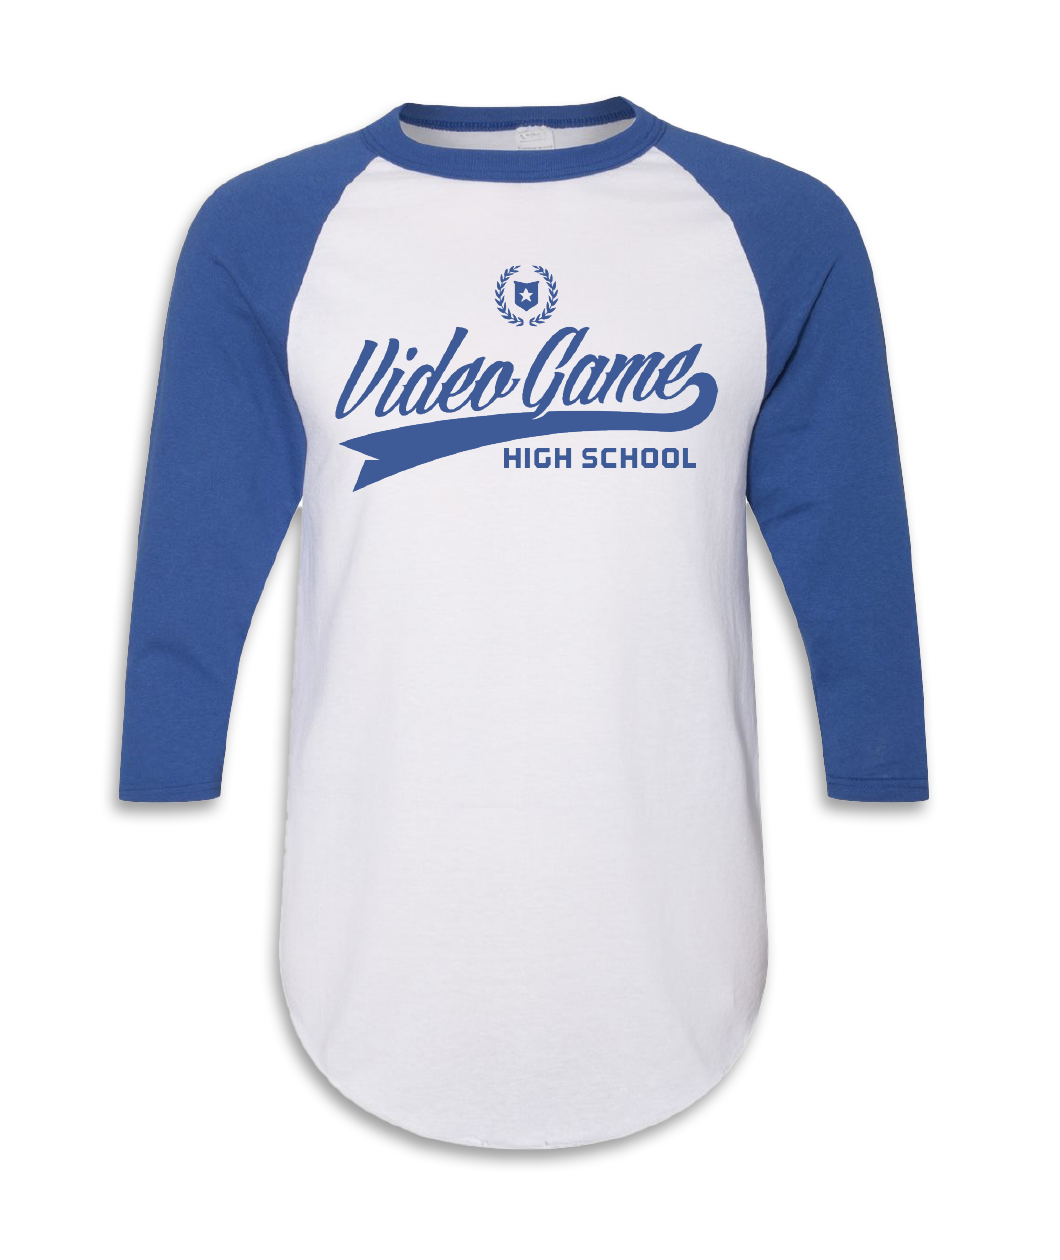 White baseball tee with royal blue sleeves and the text "Video Game High School" in a script font so it looks like a baseball player should be wearing it.